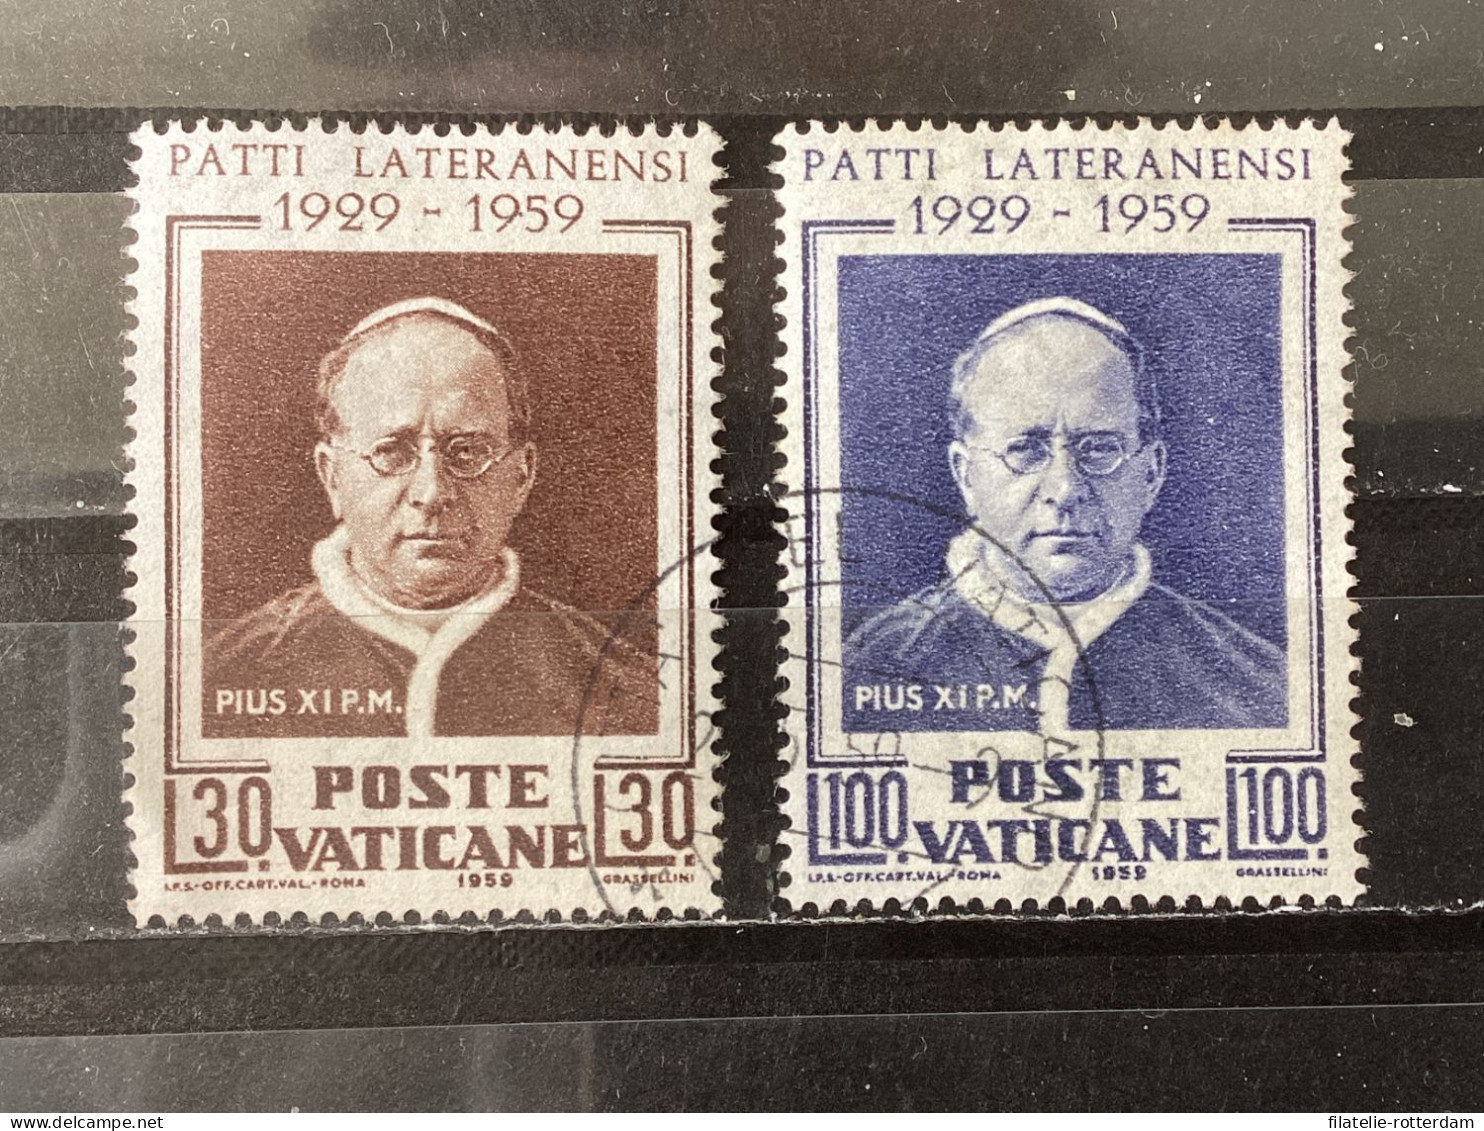 Vatican City / Vaticaanstad - Complete Set 300 Years Lateral Contract 1959 - Used Stamps